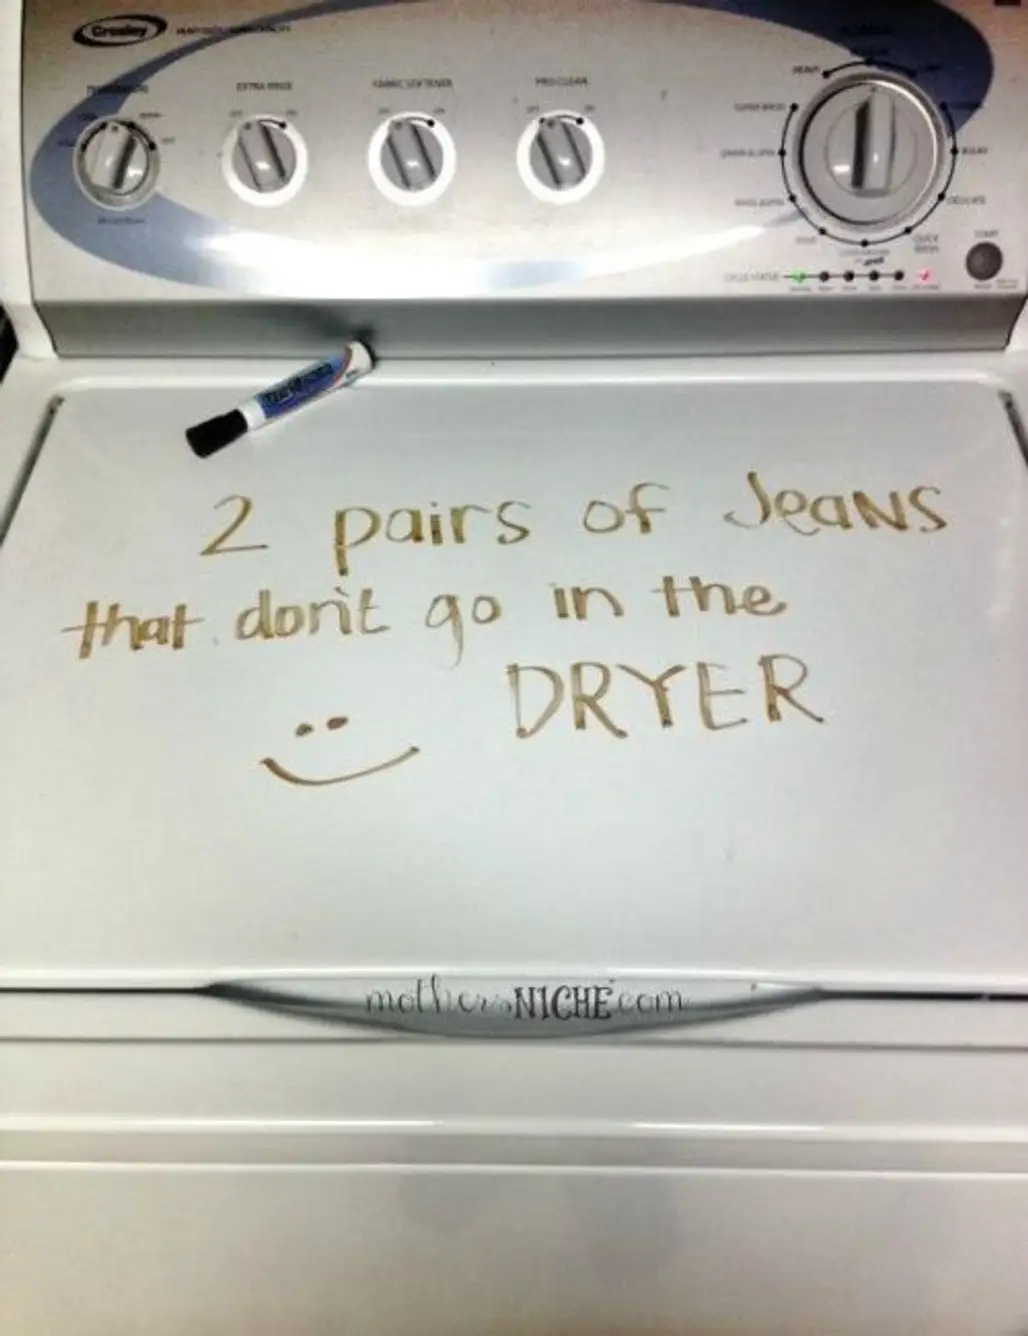 Write Instructions in Dry Erase Marker on Your Washing and Drying Machine to Avoid Laundry Mishaps